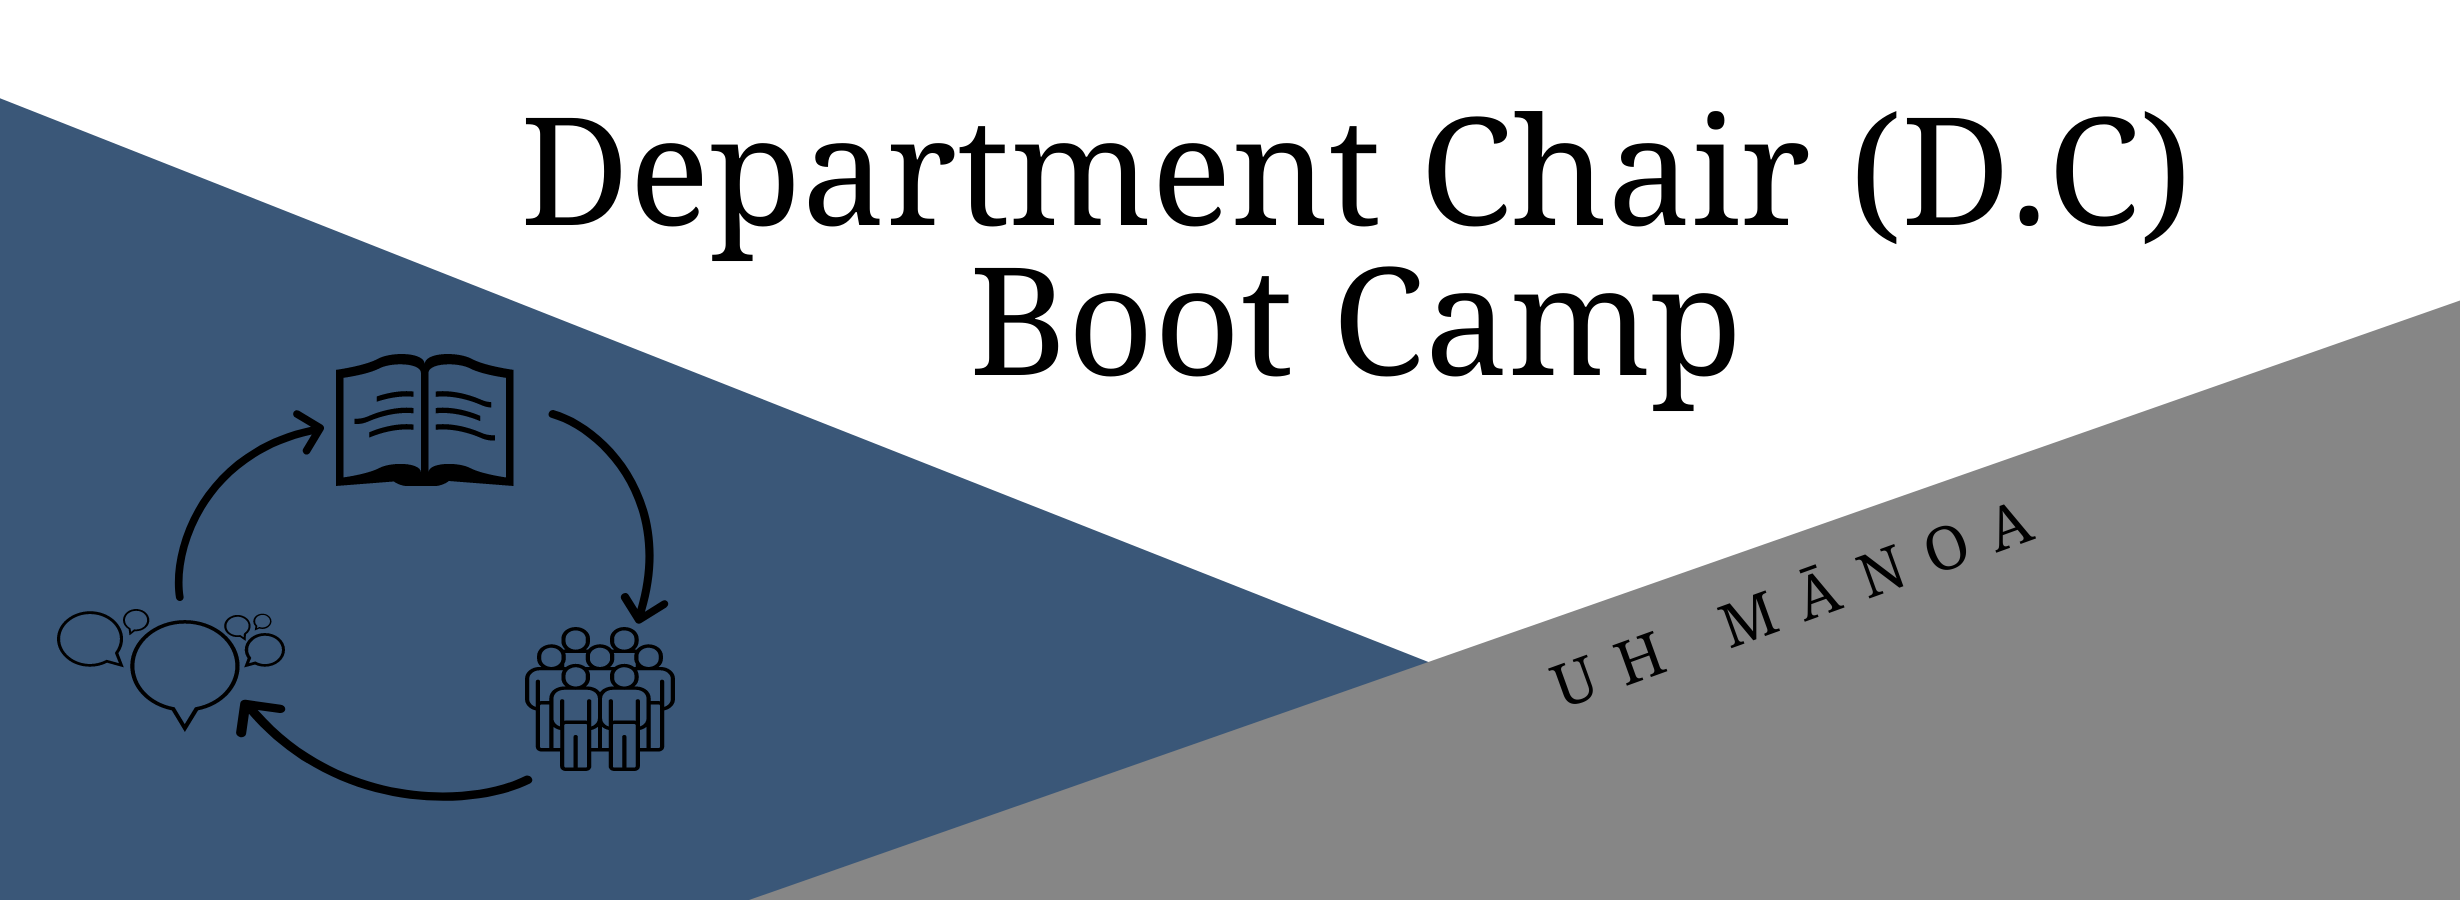 Department Chair (DC) Boot Camp, UH Manoa